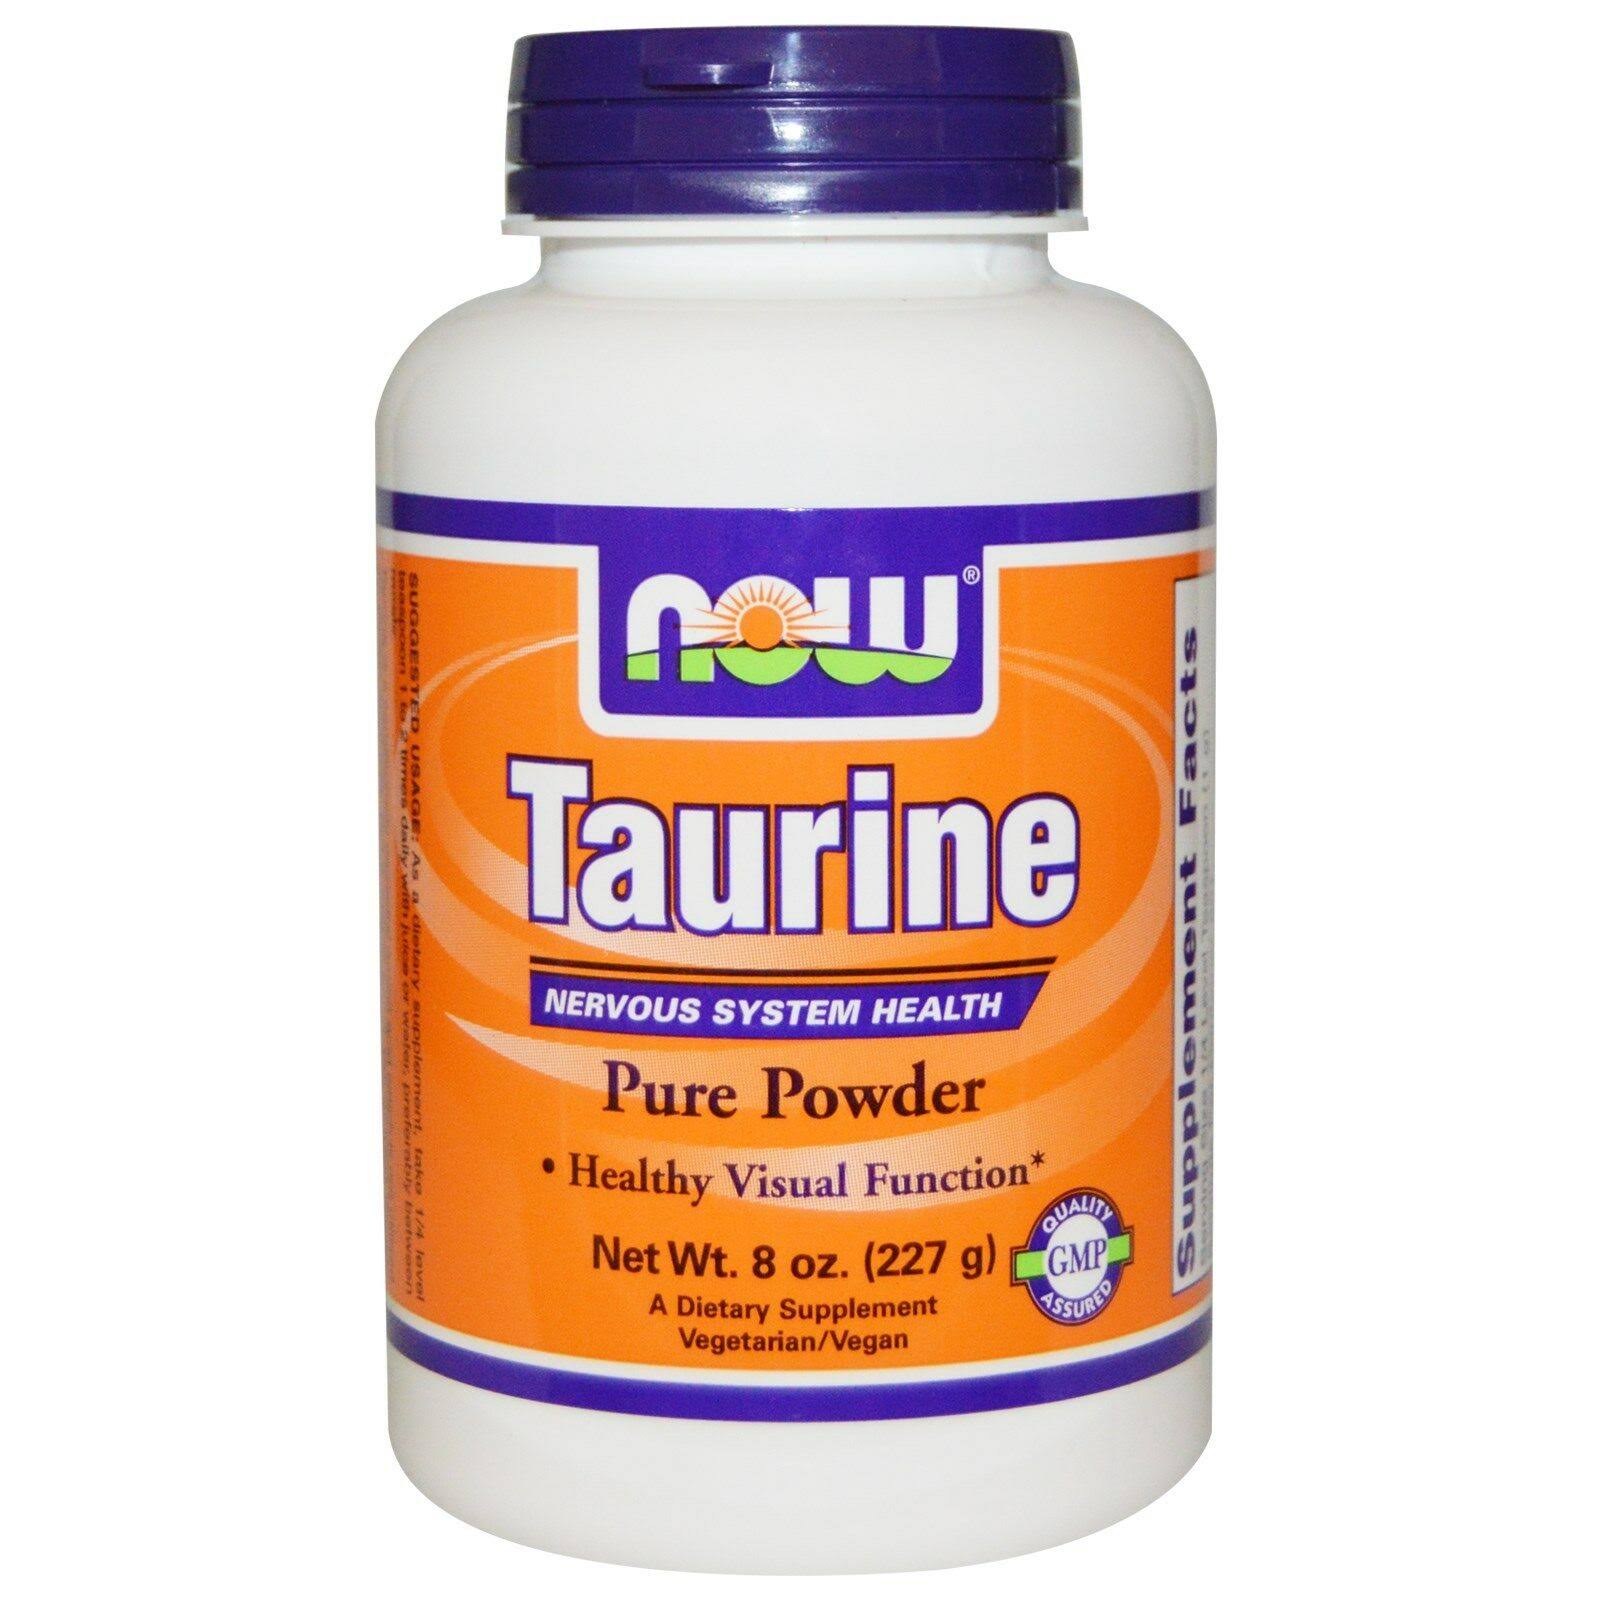 Now Foods Taurine Pure Powder - 227g